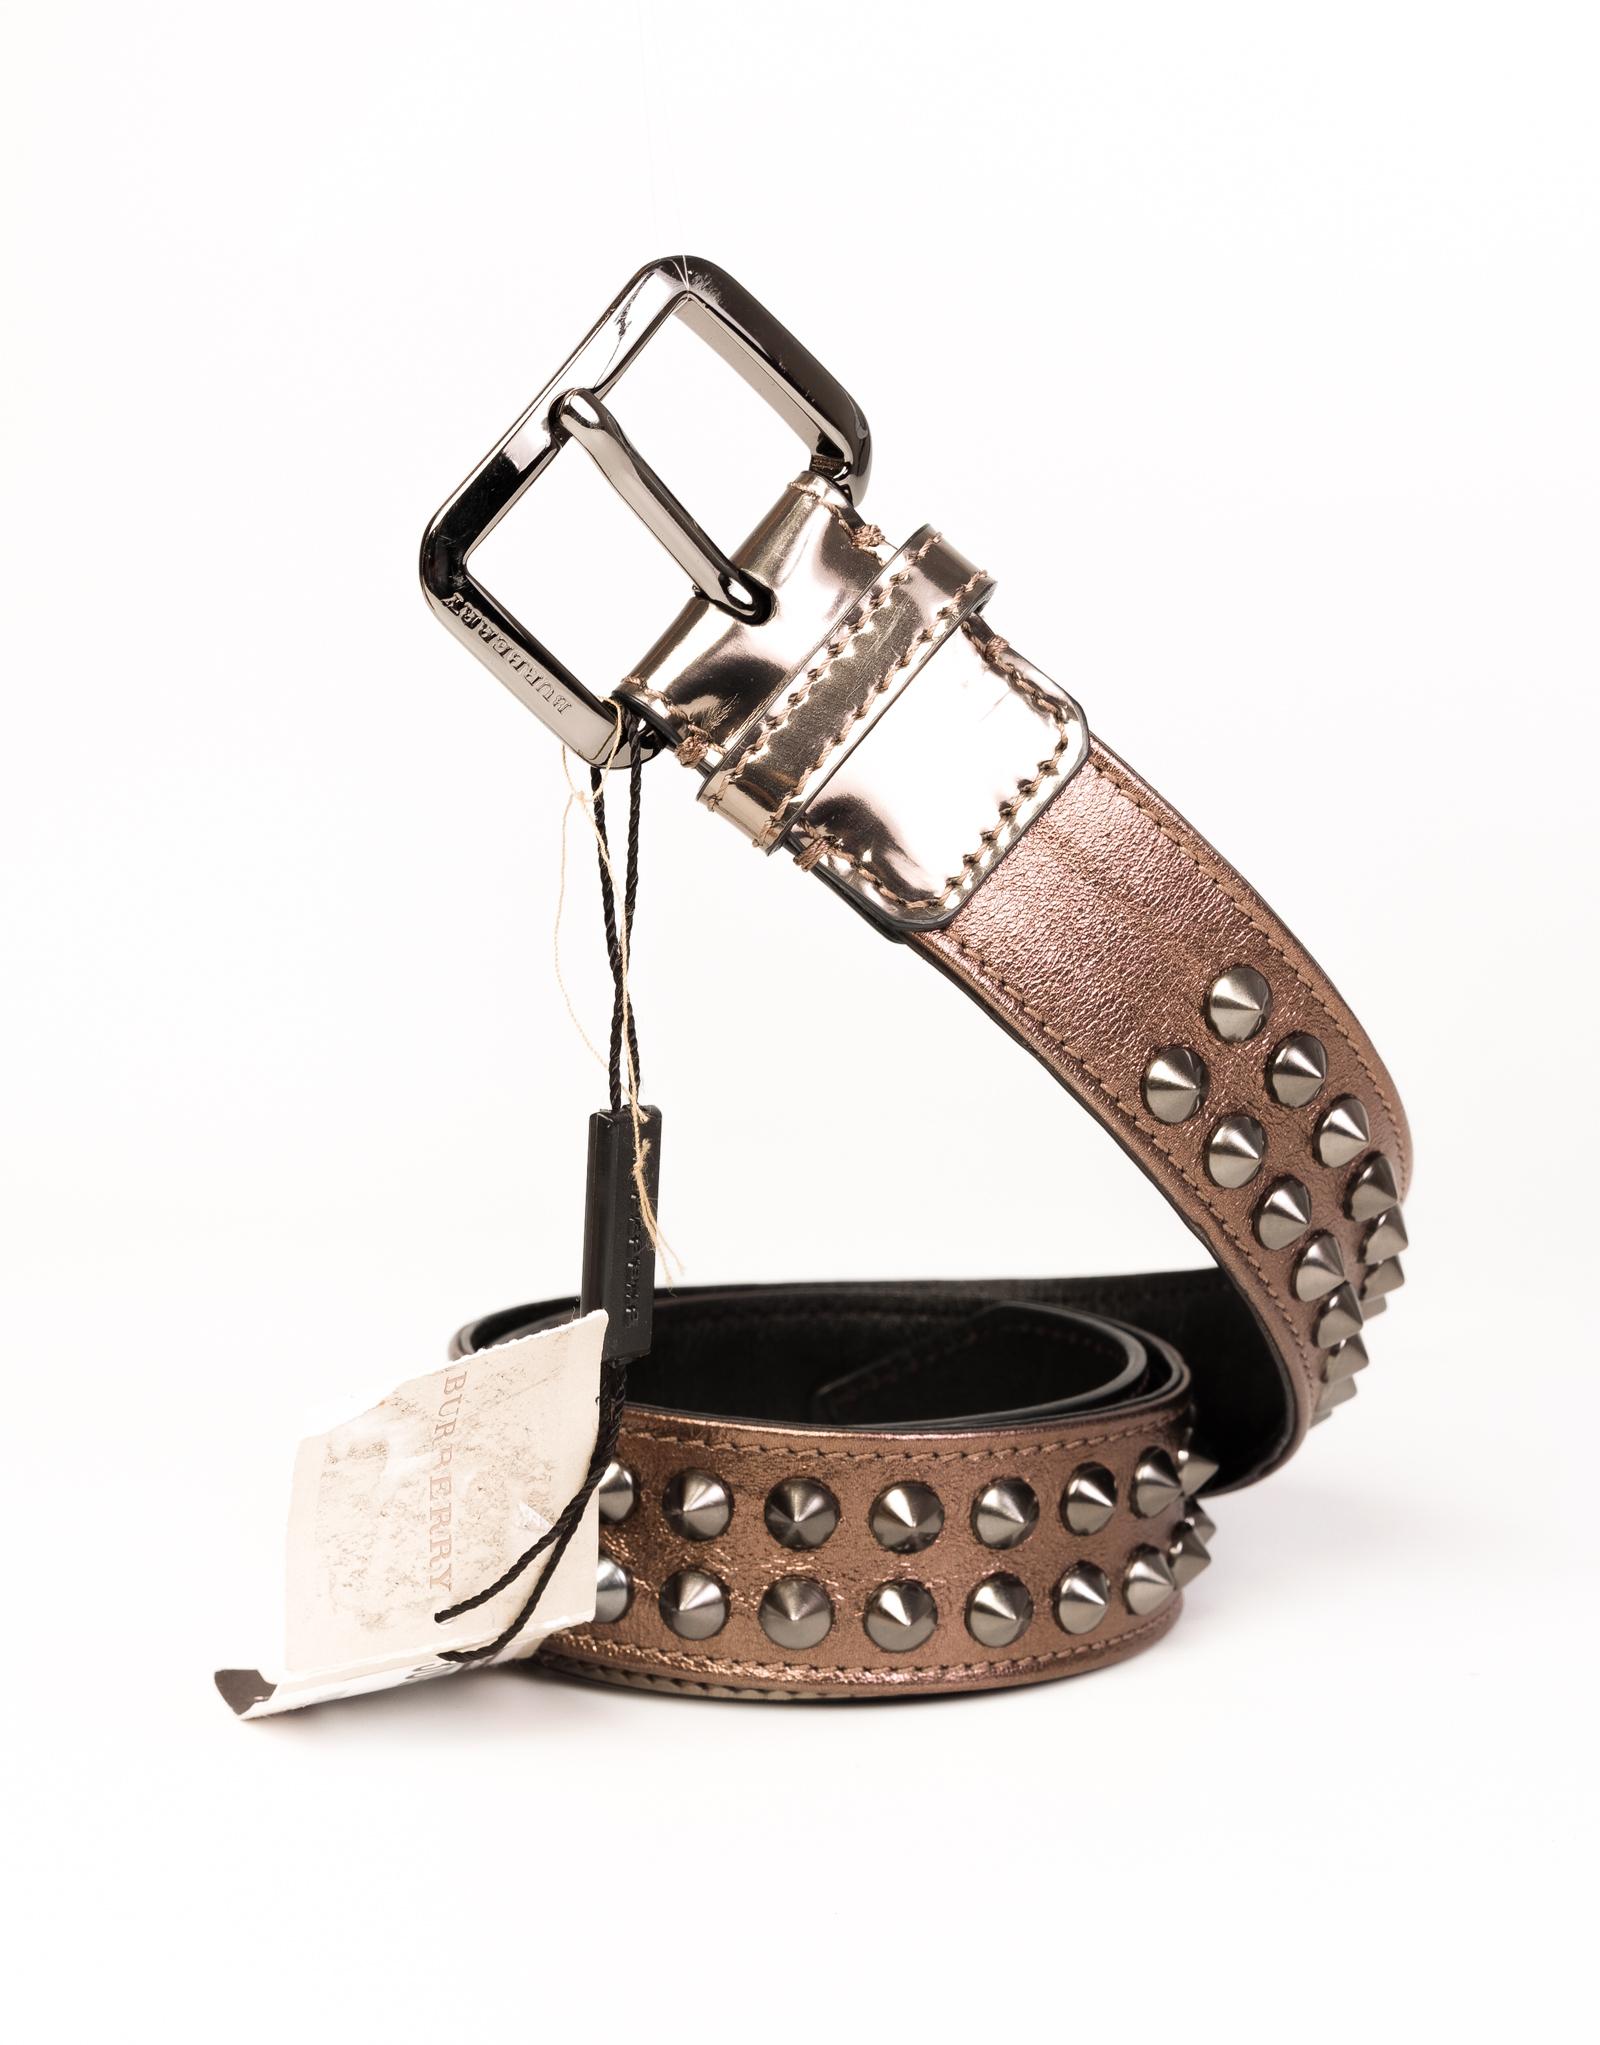 BURBERRY STUDDED DARK NICKEL BELT (SIZE 28/70)

Burberry leather belt with 2 rows of studs. Brand new with the tag still on. 

COLOR: Dark Nickel
MATERIAL: Leather
ITEM CODE: ITGIOLIN4FIR
MEASURES: L 33” W 1.5”
SIZE: 28/70
EST. RETAIL: